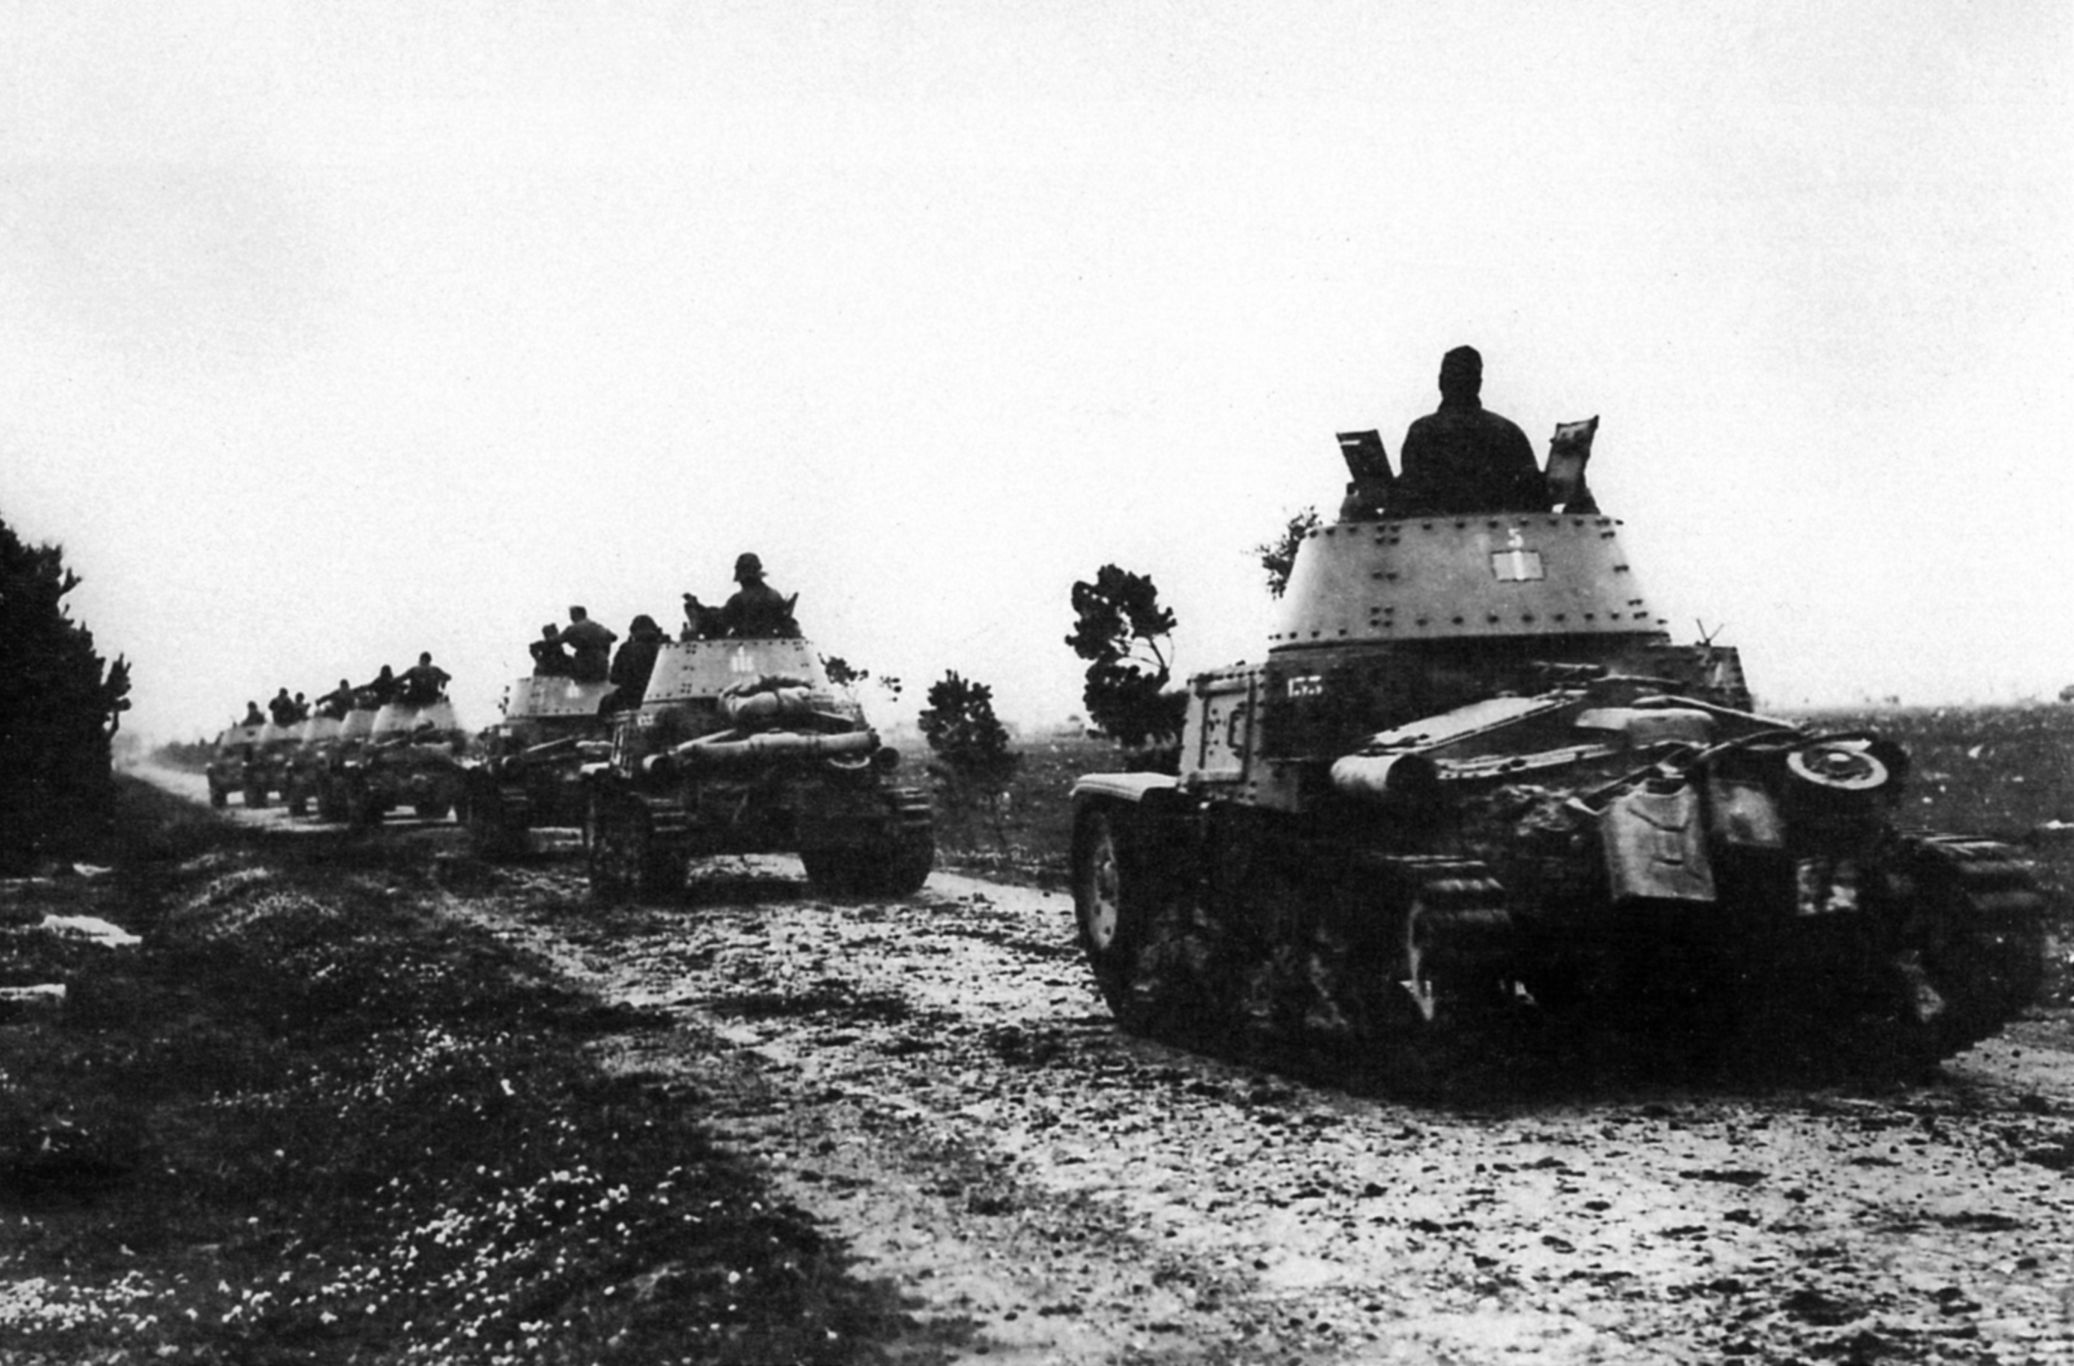 Moving toward the front in the Libyan desert in 1940, a column of M14/41 medium tanks of the 133rd Tank Regiment of the Littorio Armored Division raises a cloud of dust.